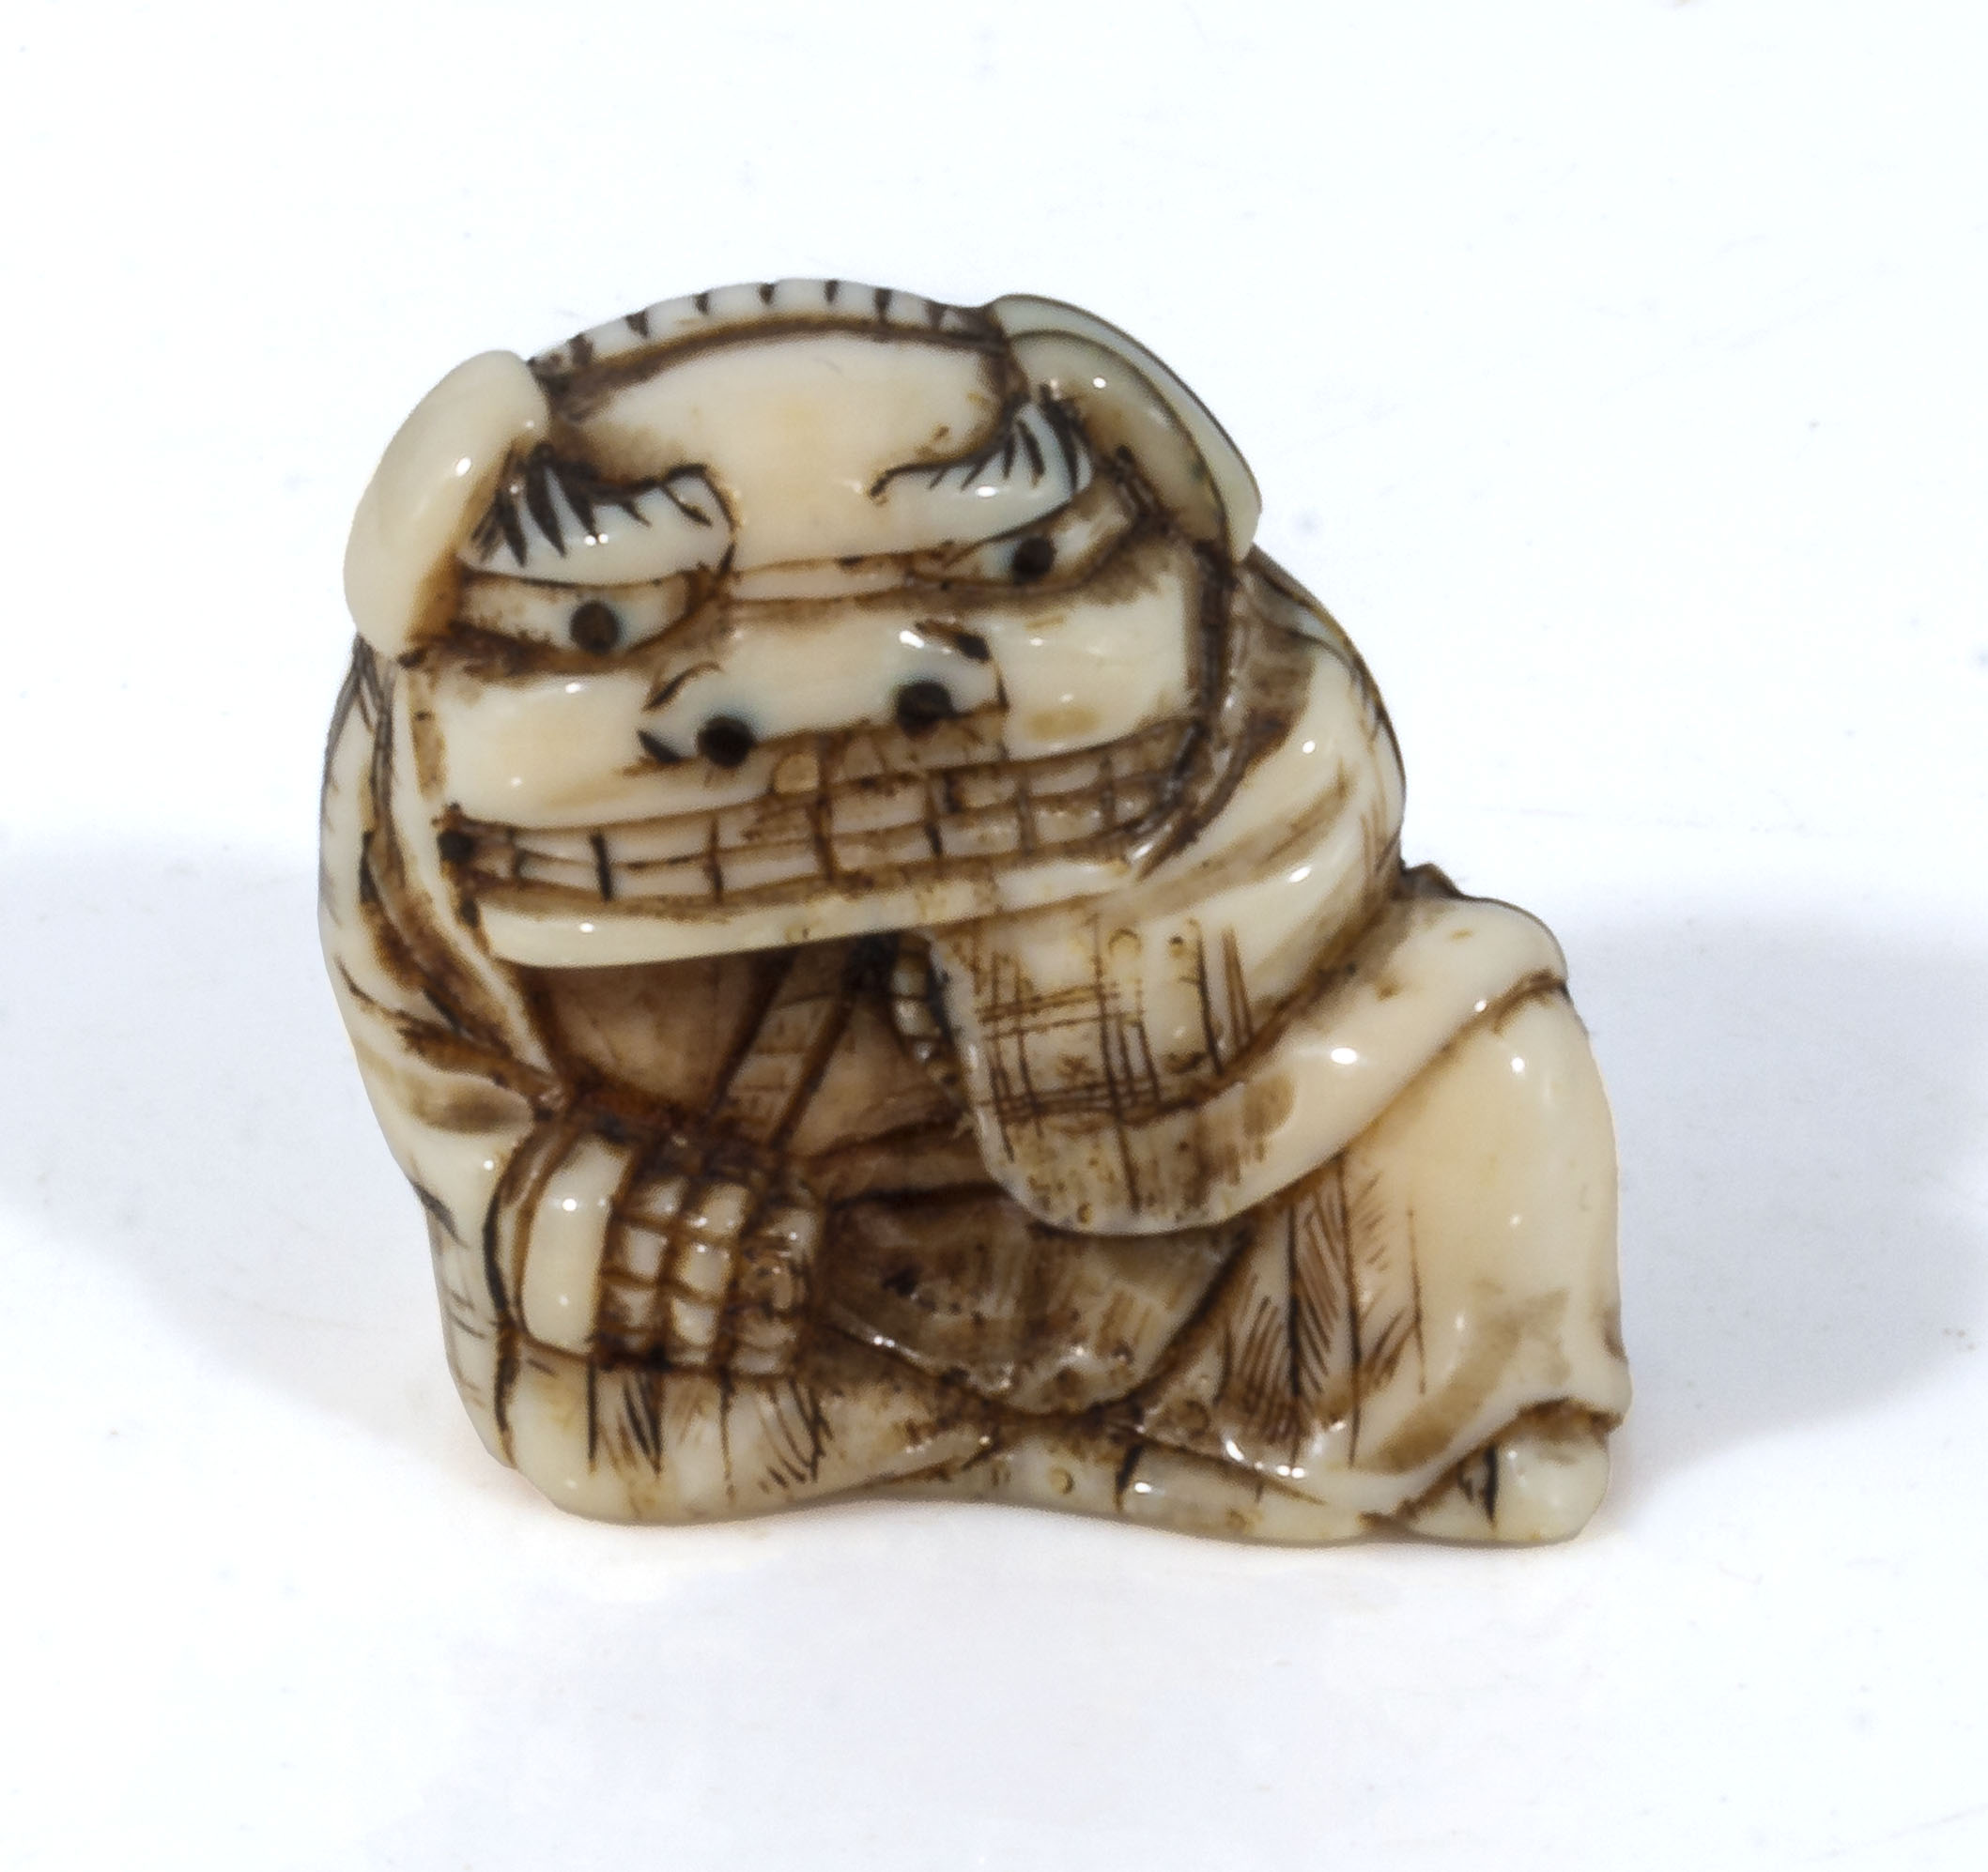 An antique Japanese ivory netsuke meiji period, depicting a boy dressed in a dragon outfit, with